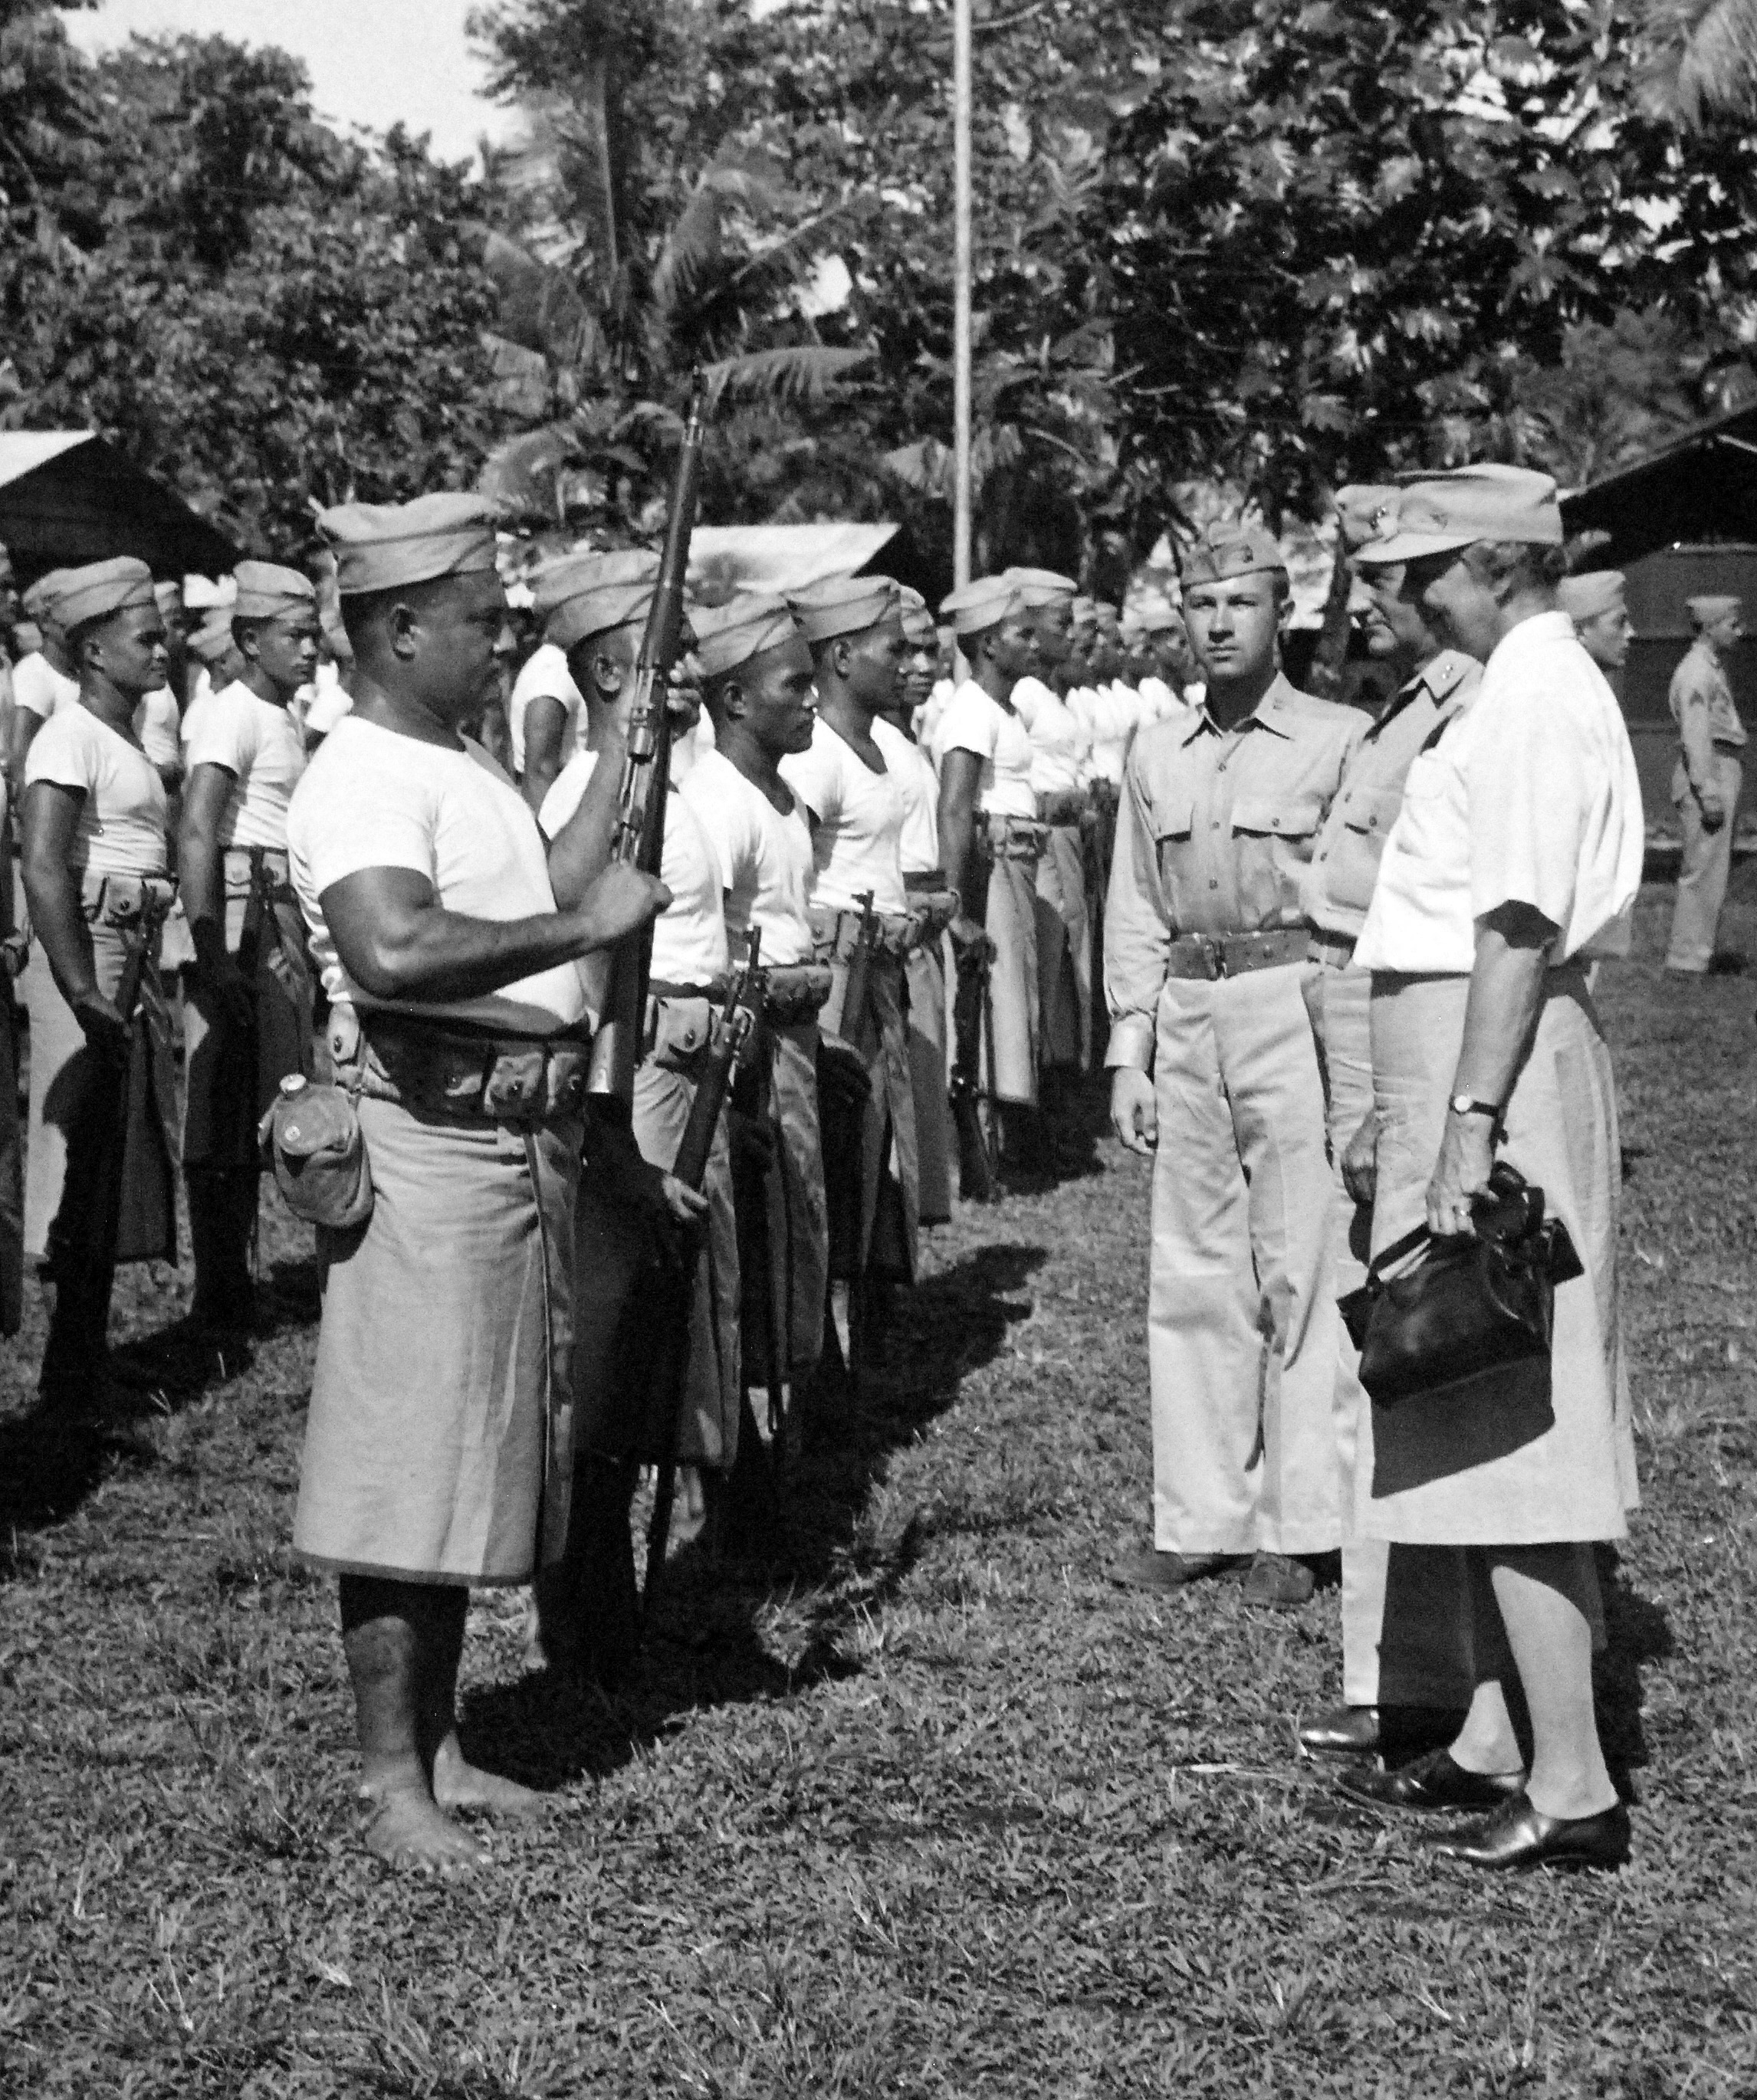 First Lady Eleanor Roosevelt inspecting “native” Samoan Marines at Tutuila, Samoa, 23 Aug 1943. Also present are United States Marine MGen C.F.B. Price, Commanding General of the area and Captain John R. Napton, Jr.